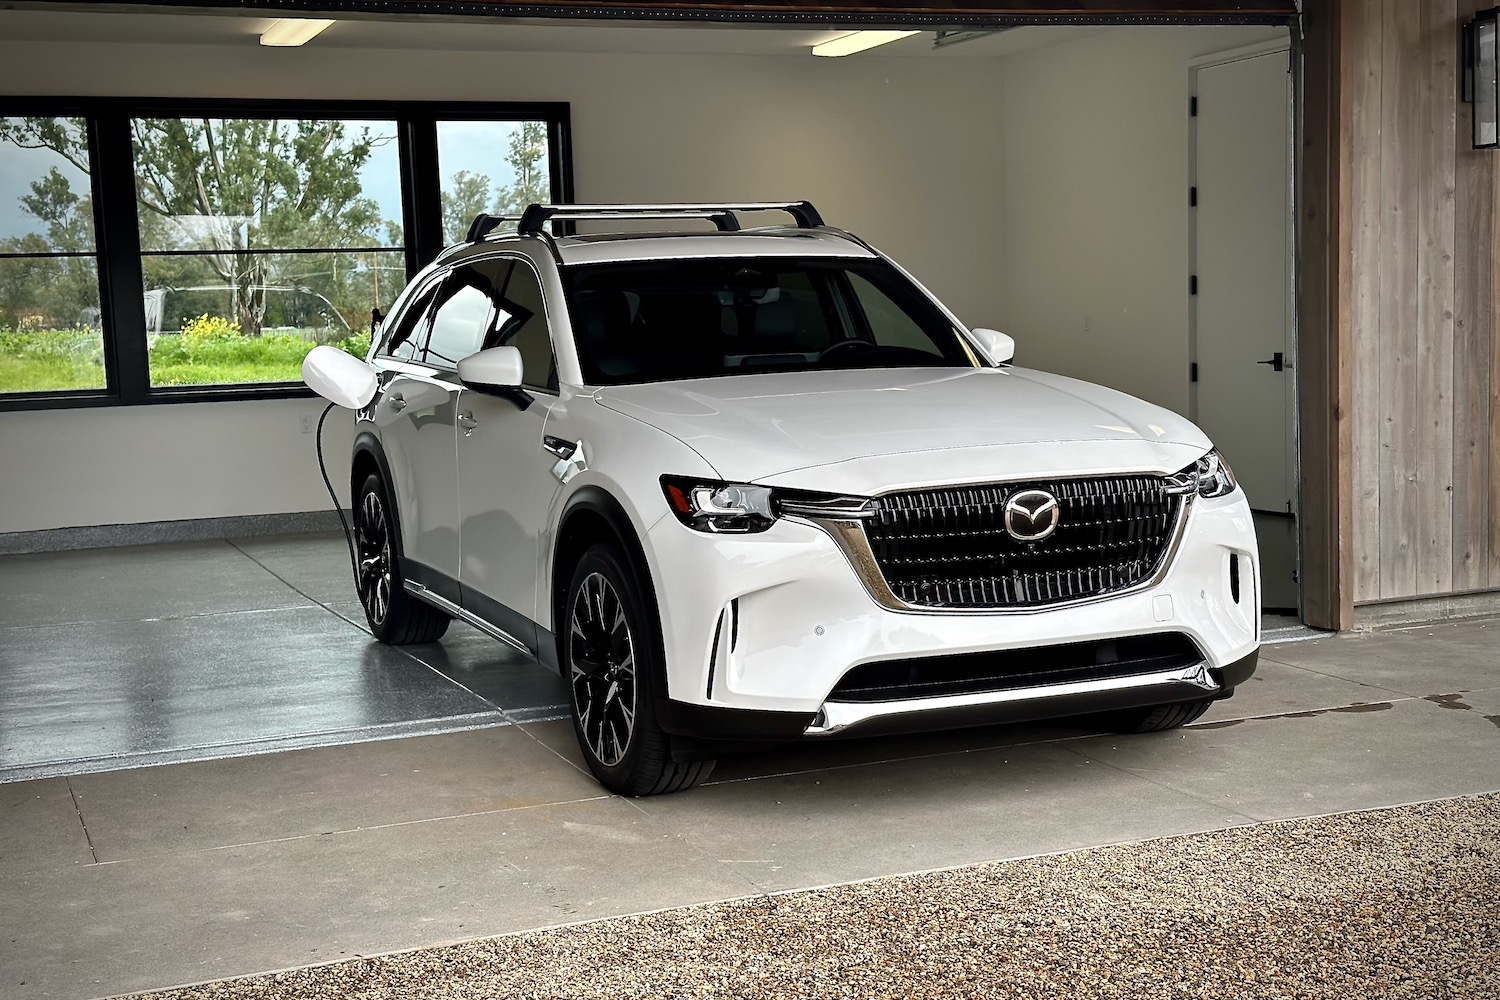 2024 Mazda CX-90 PHEV front end angle from passenger's side parked in a garage.